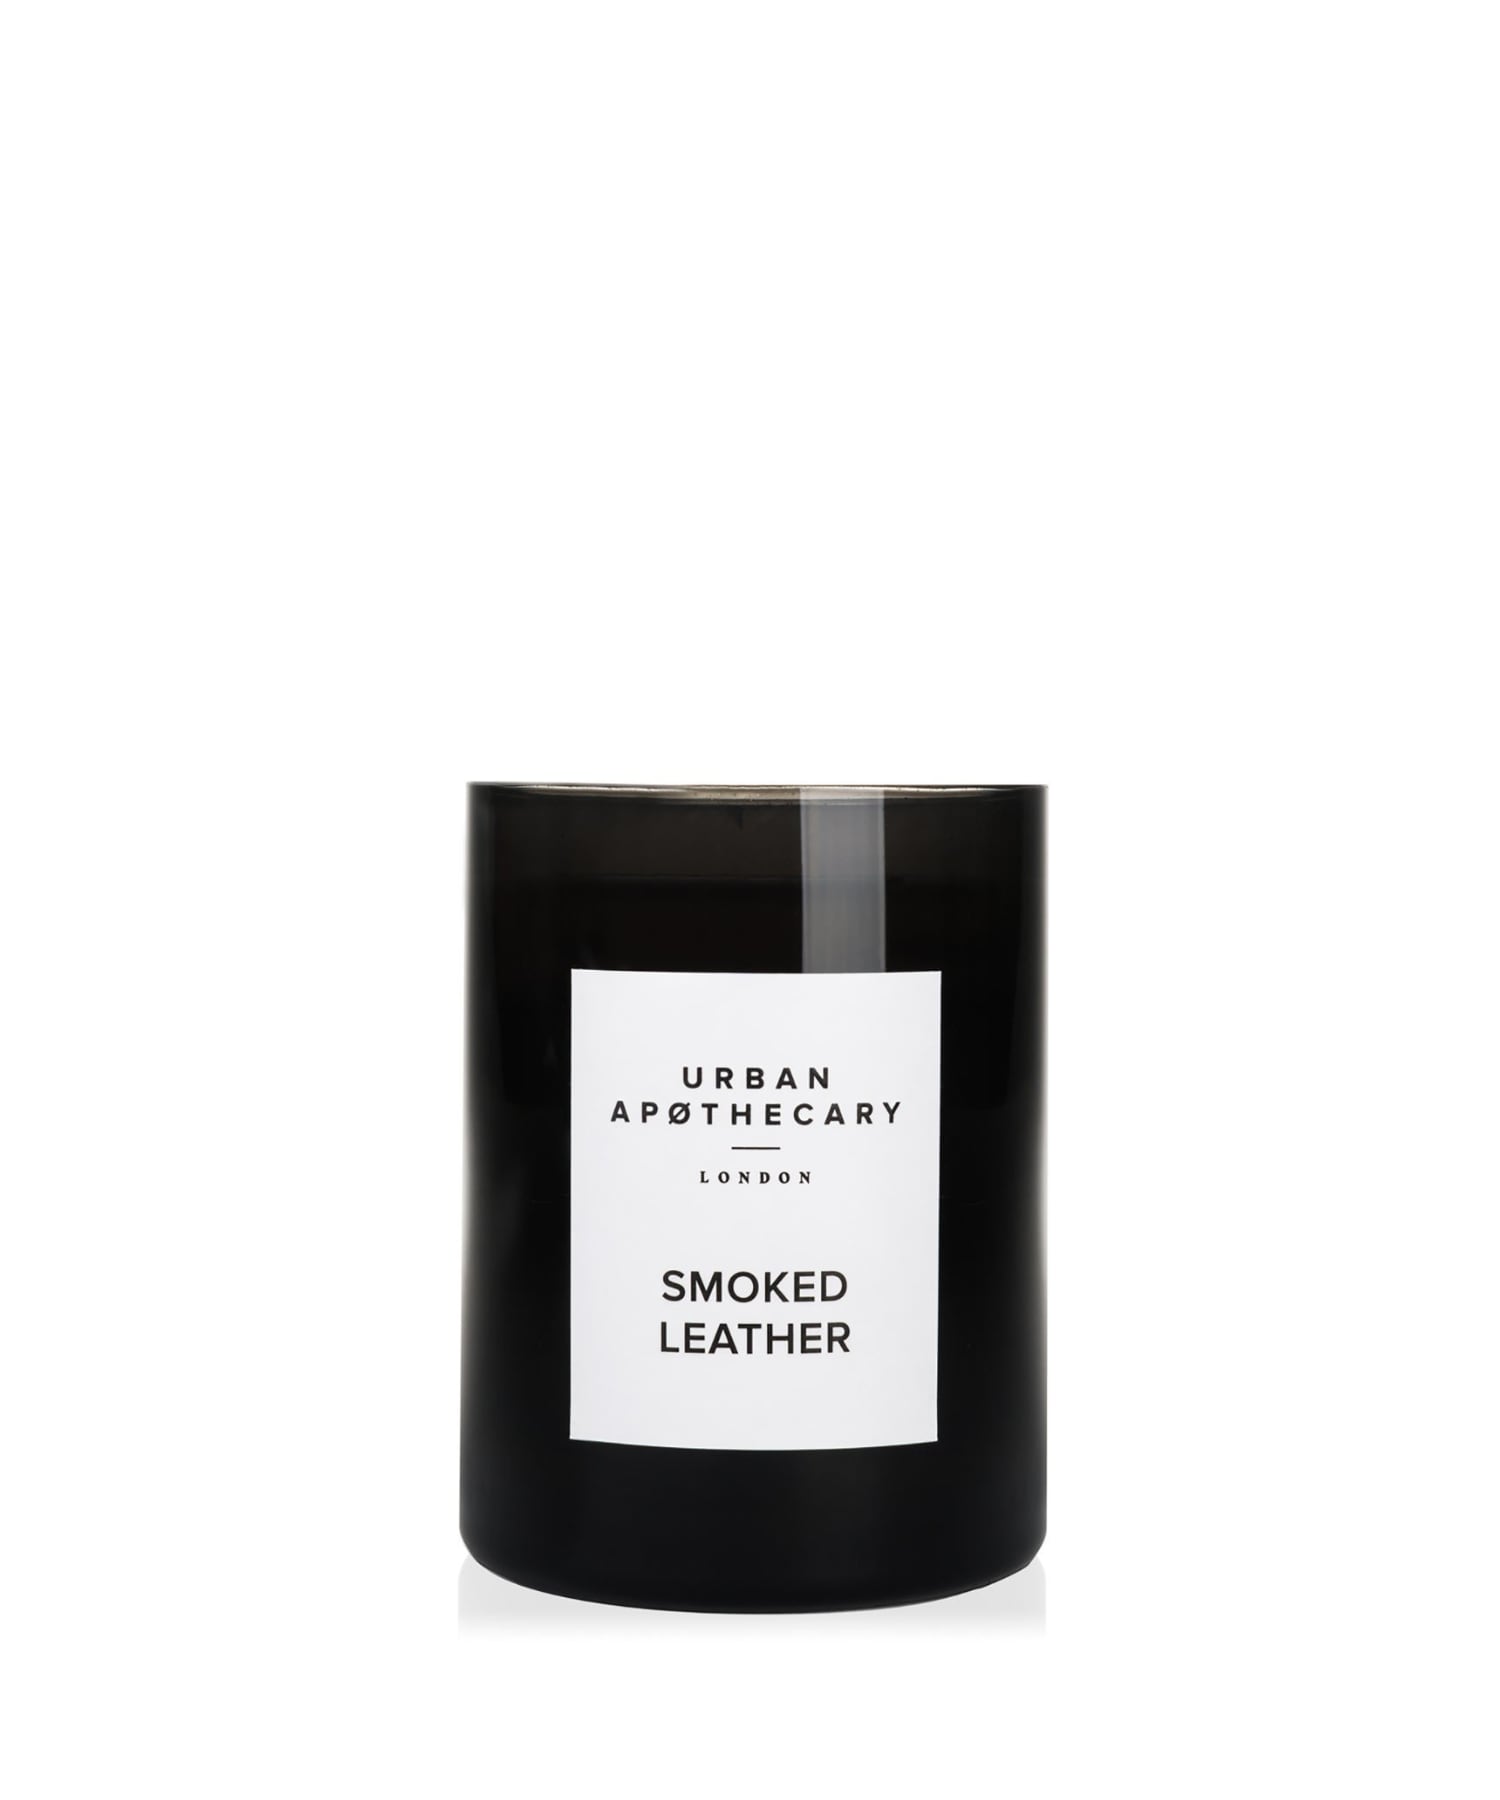 URBAN APOTHECARY Smoked Leather Luxury Glass Candle 300 g